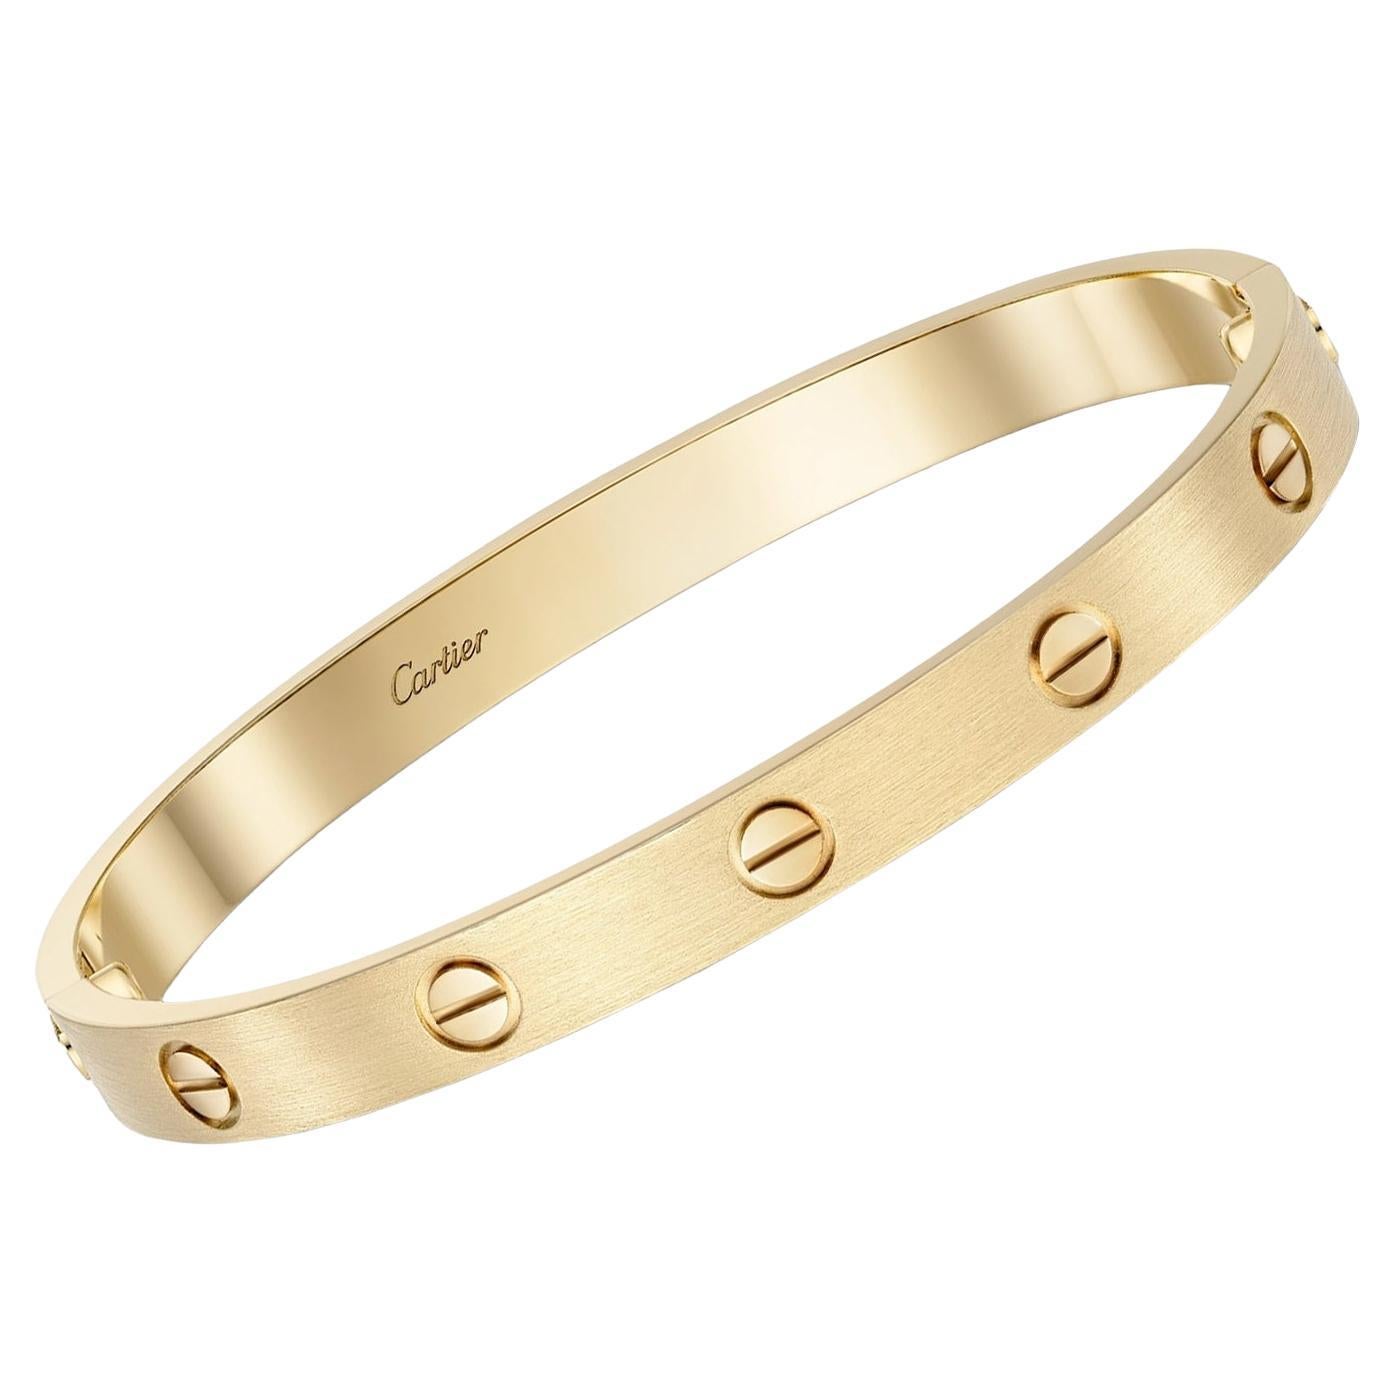 Cartier Love Bracelet 18K Yellow Gold Size 15 Brushed Finish with Screwdriver